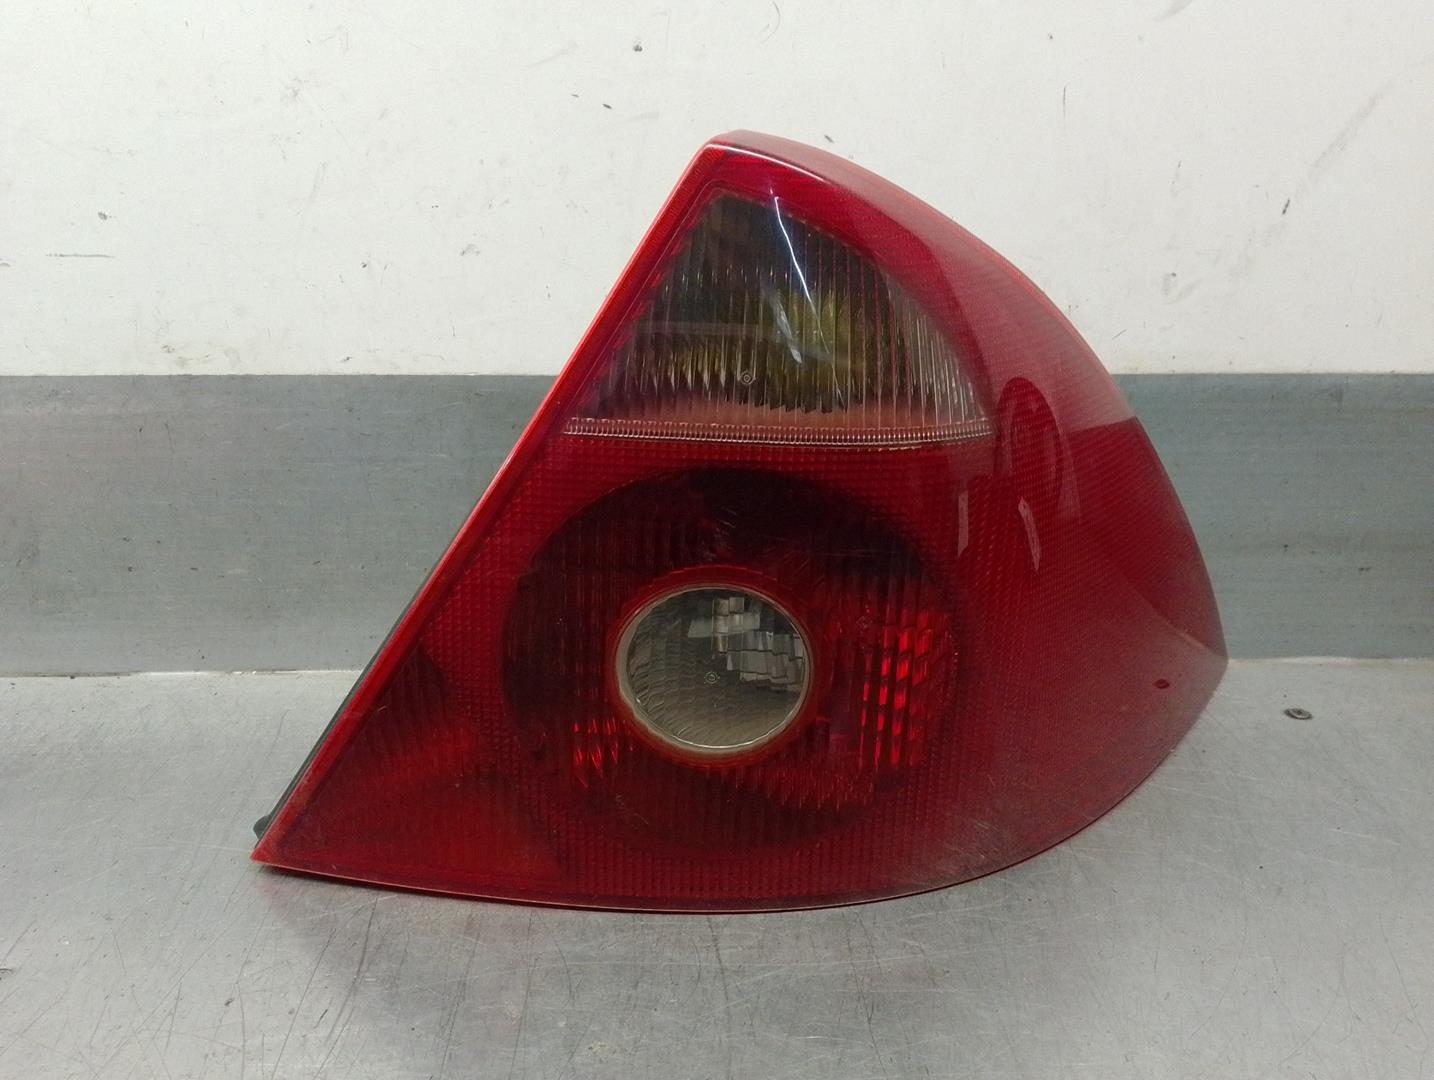 FORD Mondeo 3 generation (2000-2007) Rear Right Taillight Lamp 1S7113404A, 5PUERTAS 24578402